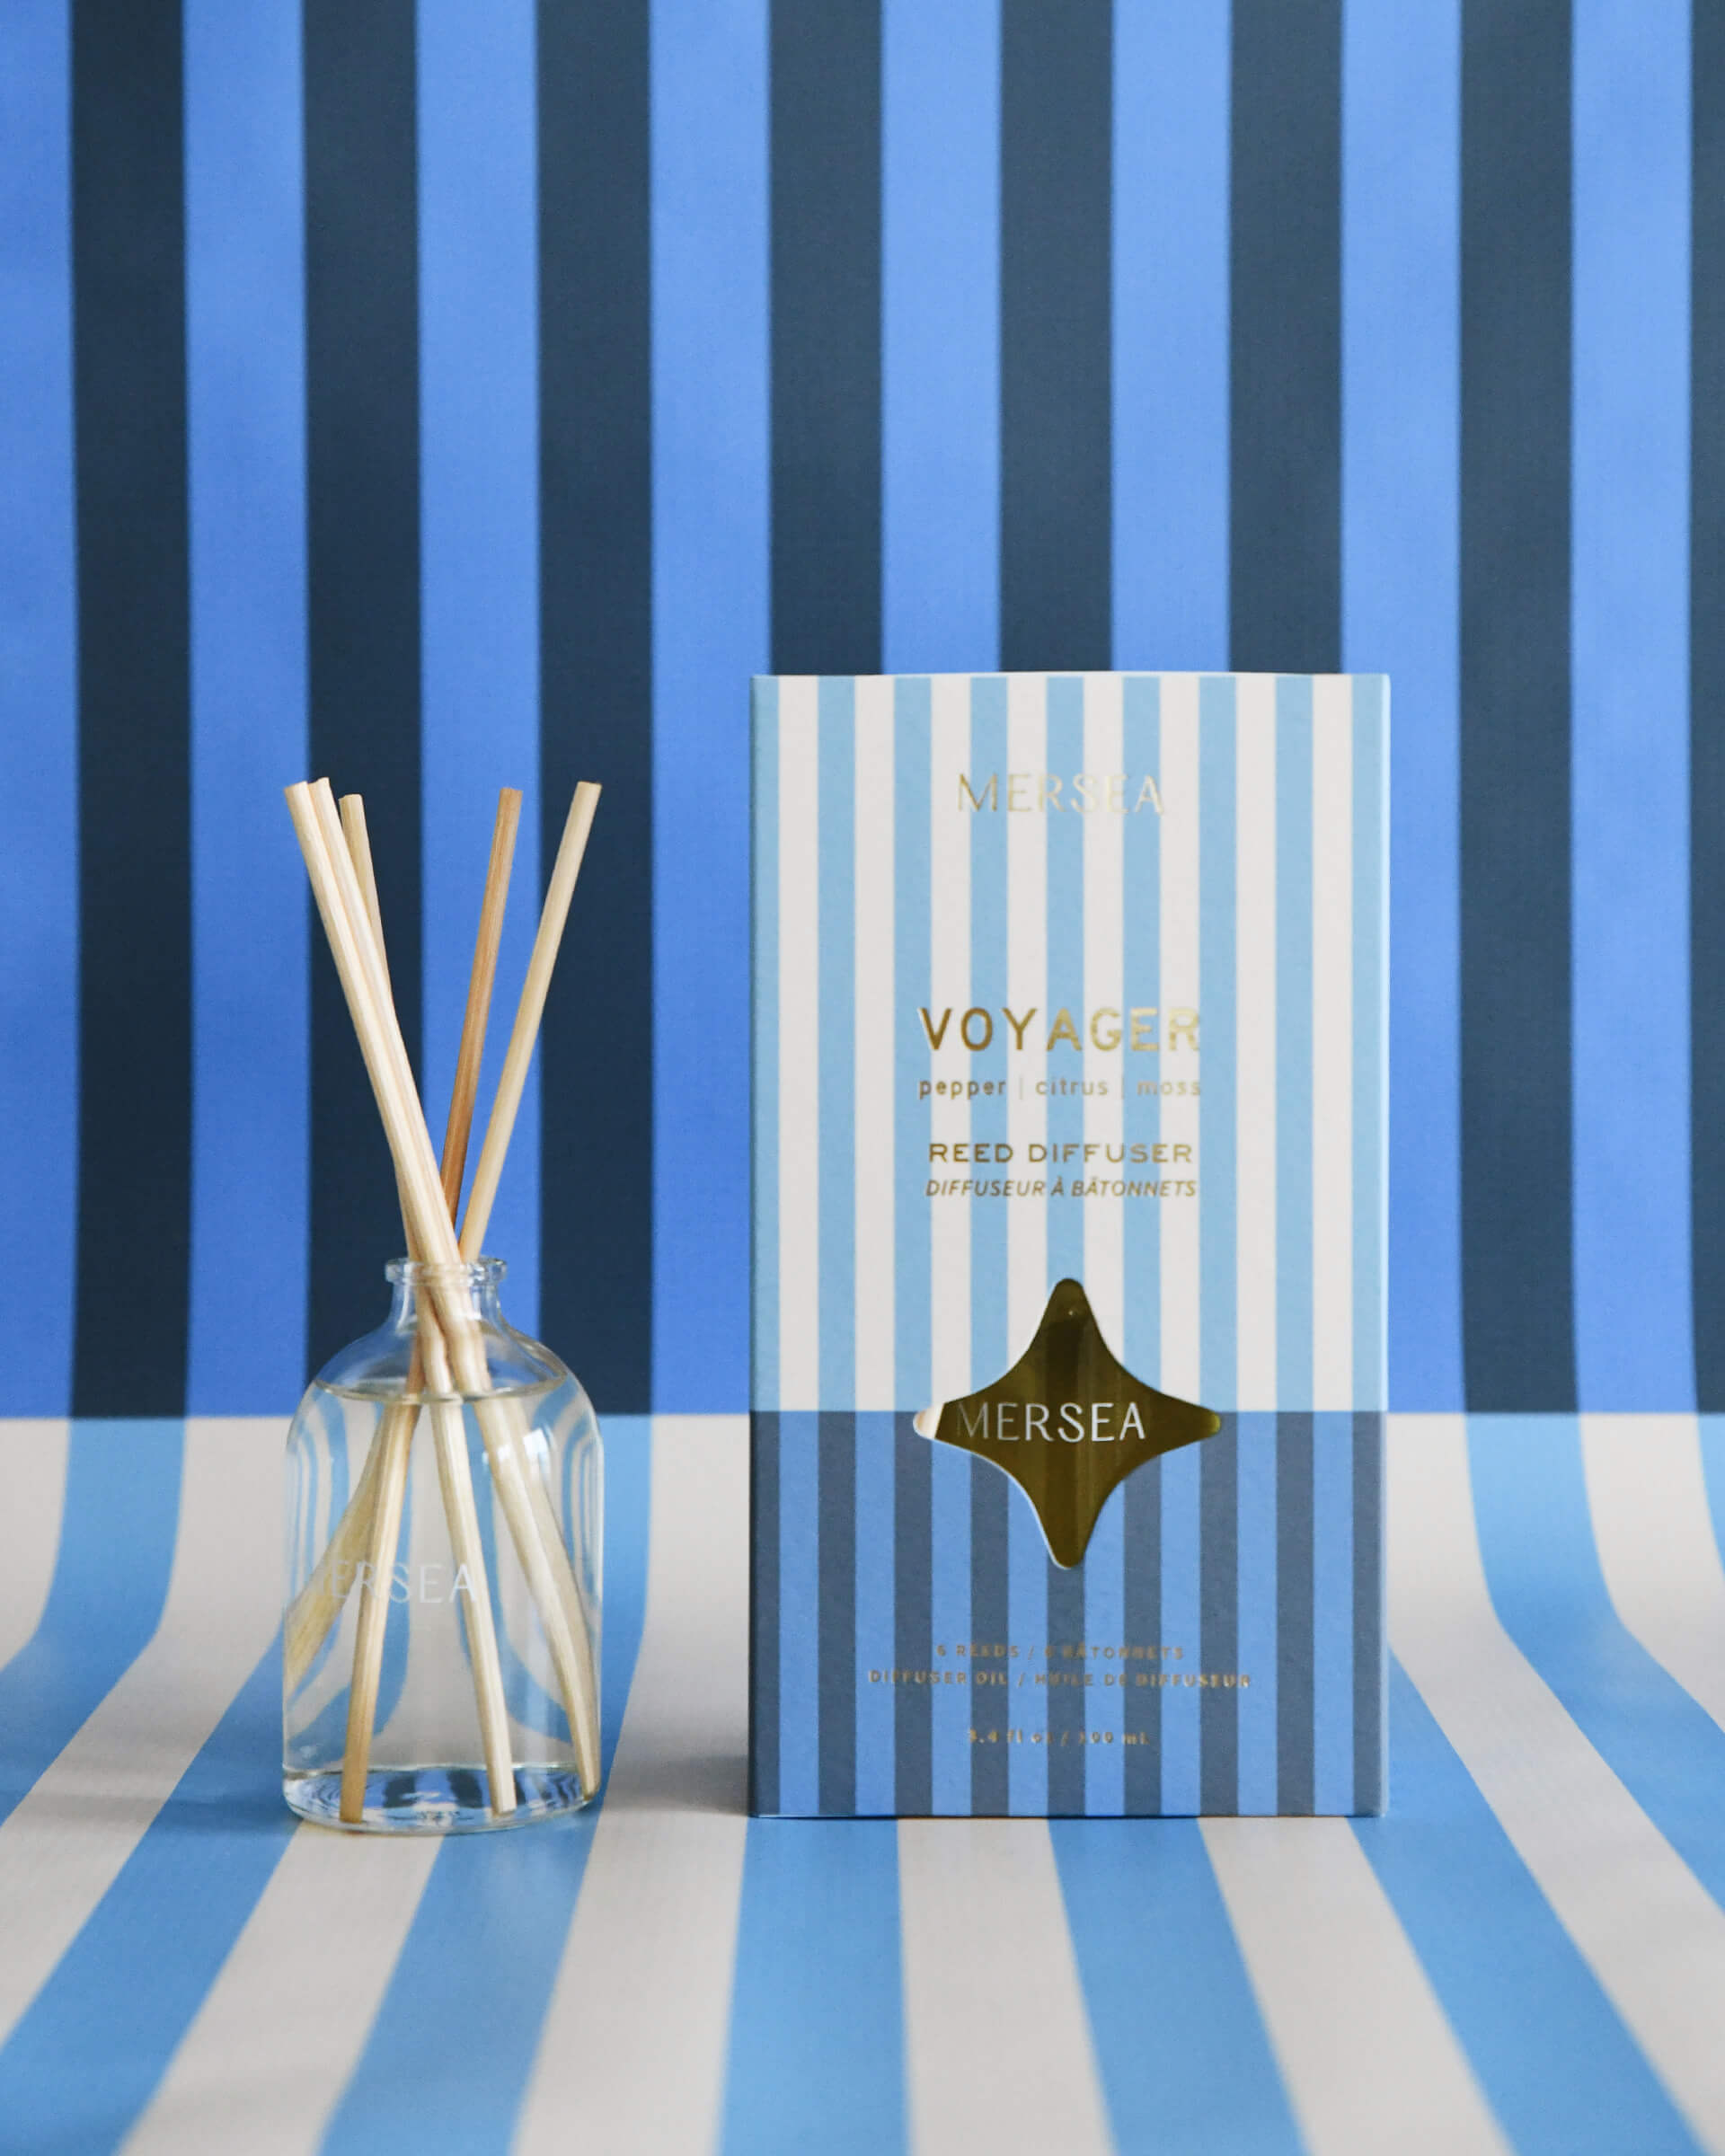 voyager reed diffuser boxed in light and dark blue stripes on light and blue striped background 